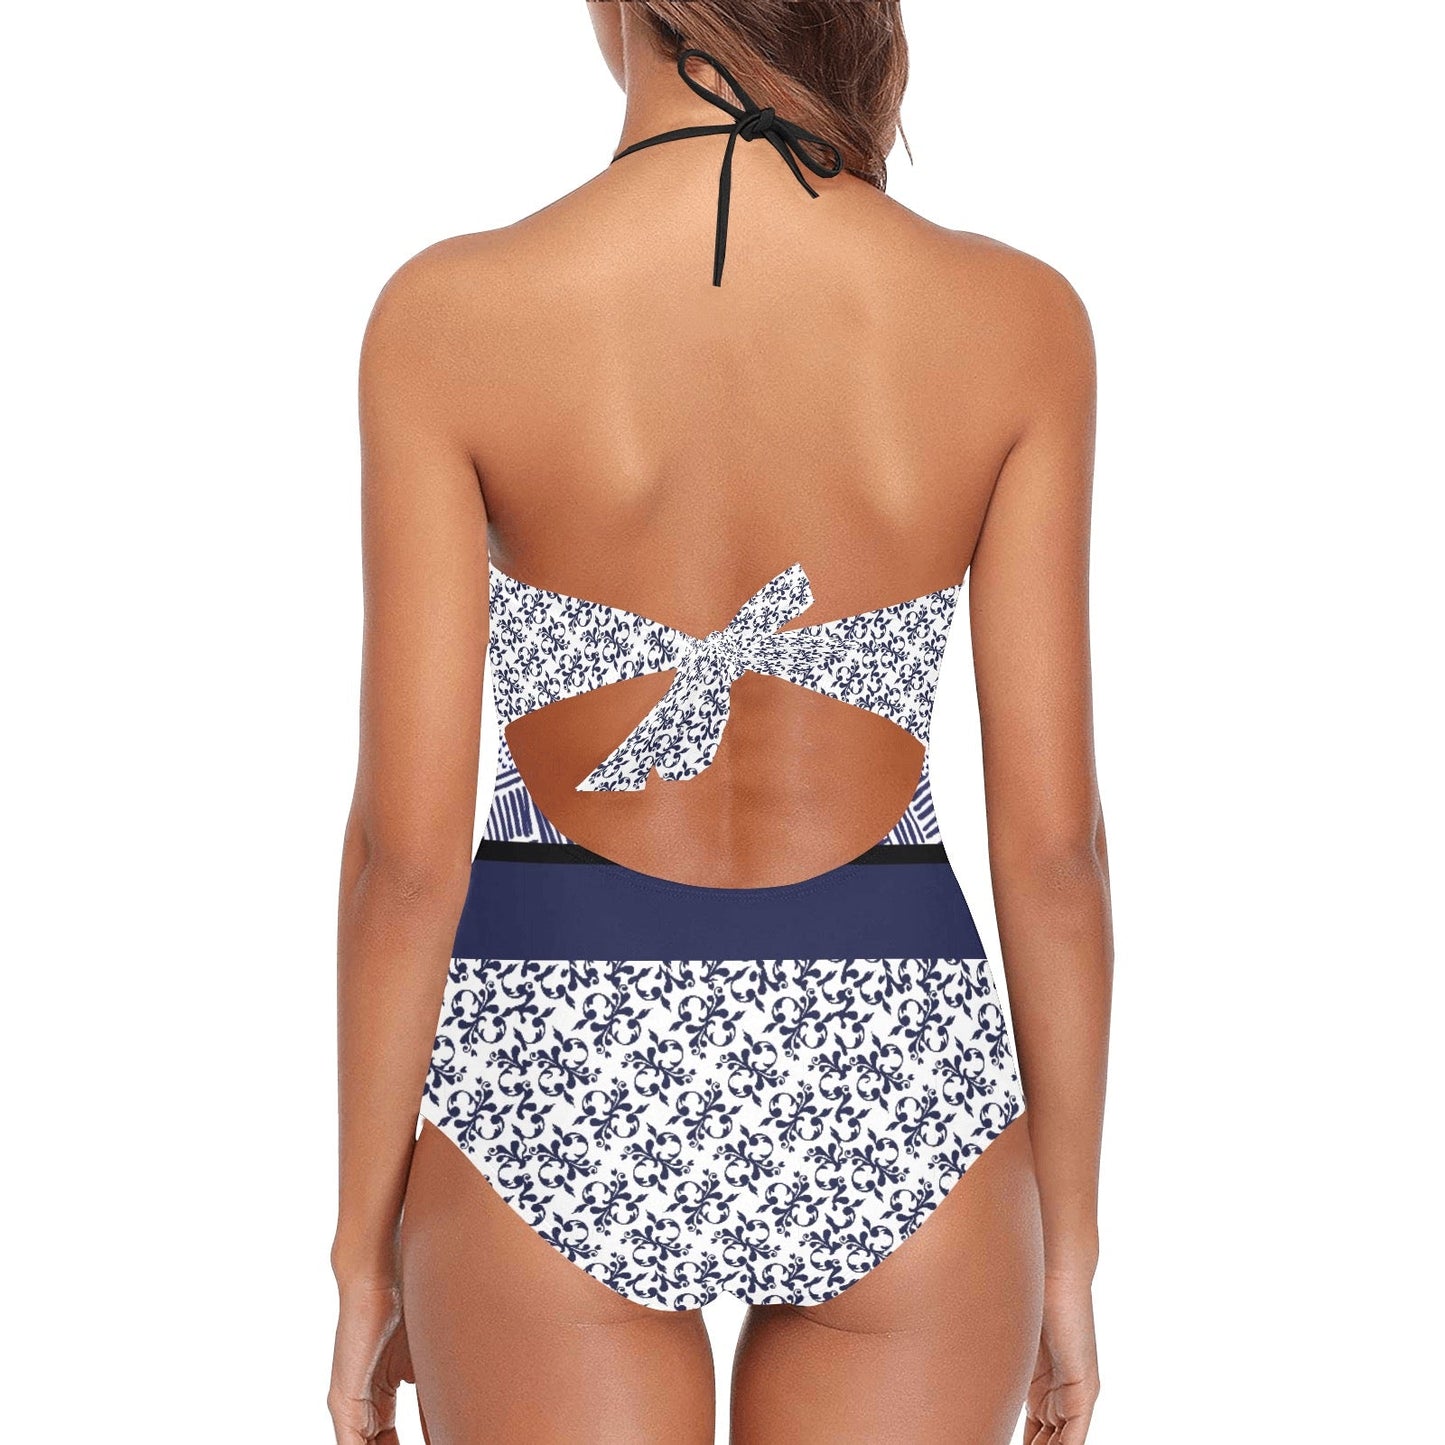 Caracas Collection Blue & Black Lace Band Swimsuit. Design hand-painted by the Designer Maria Alejandra Echenique